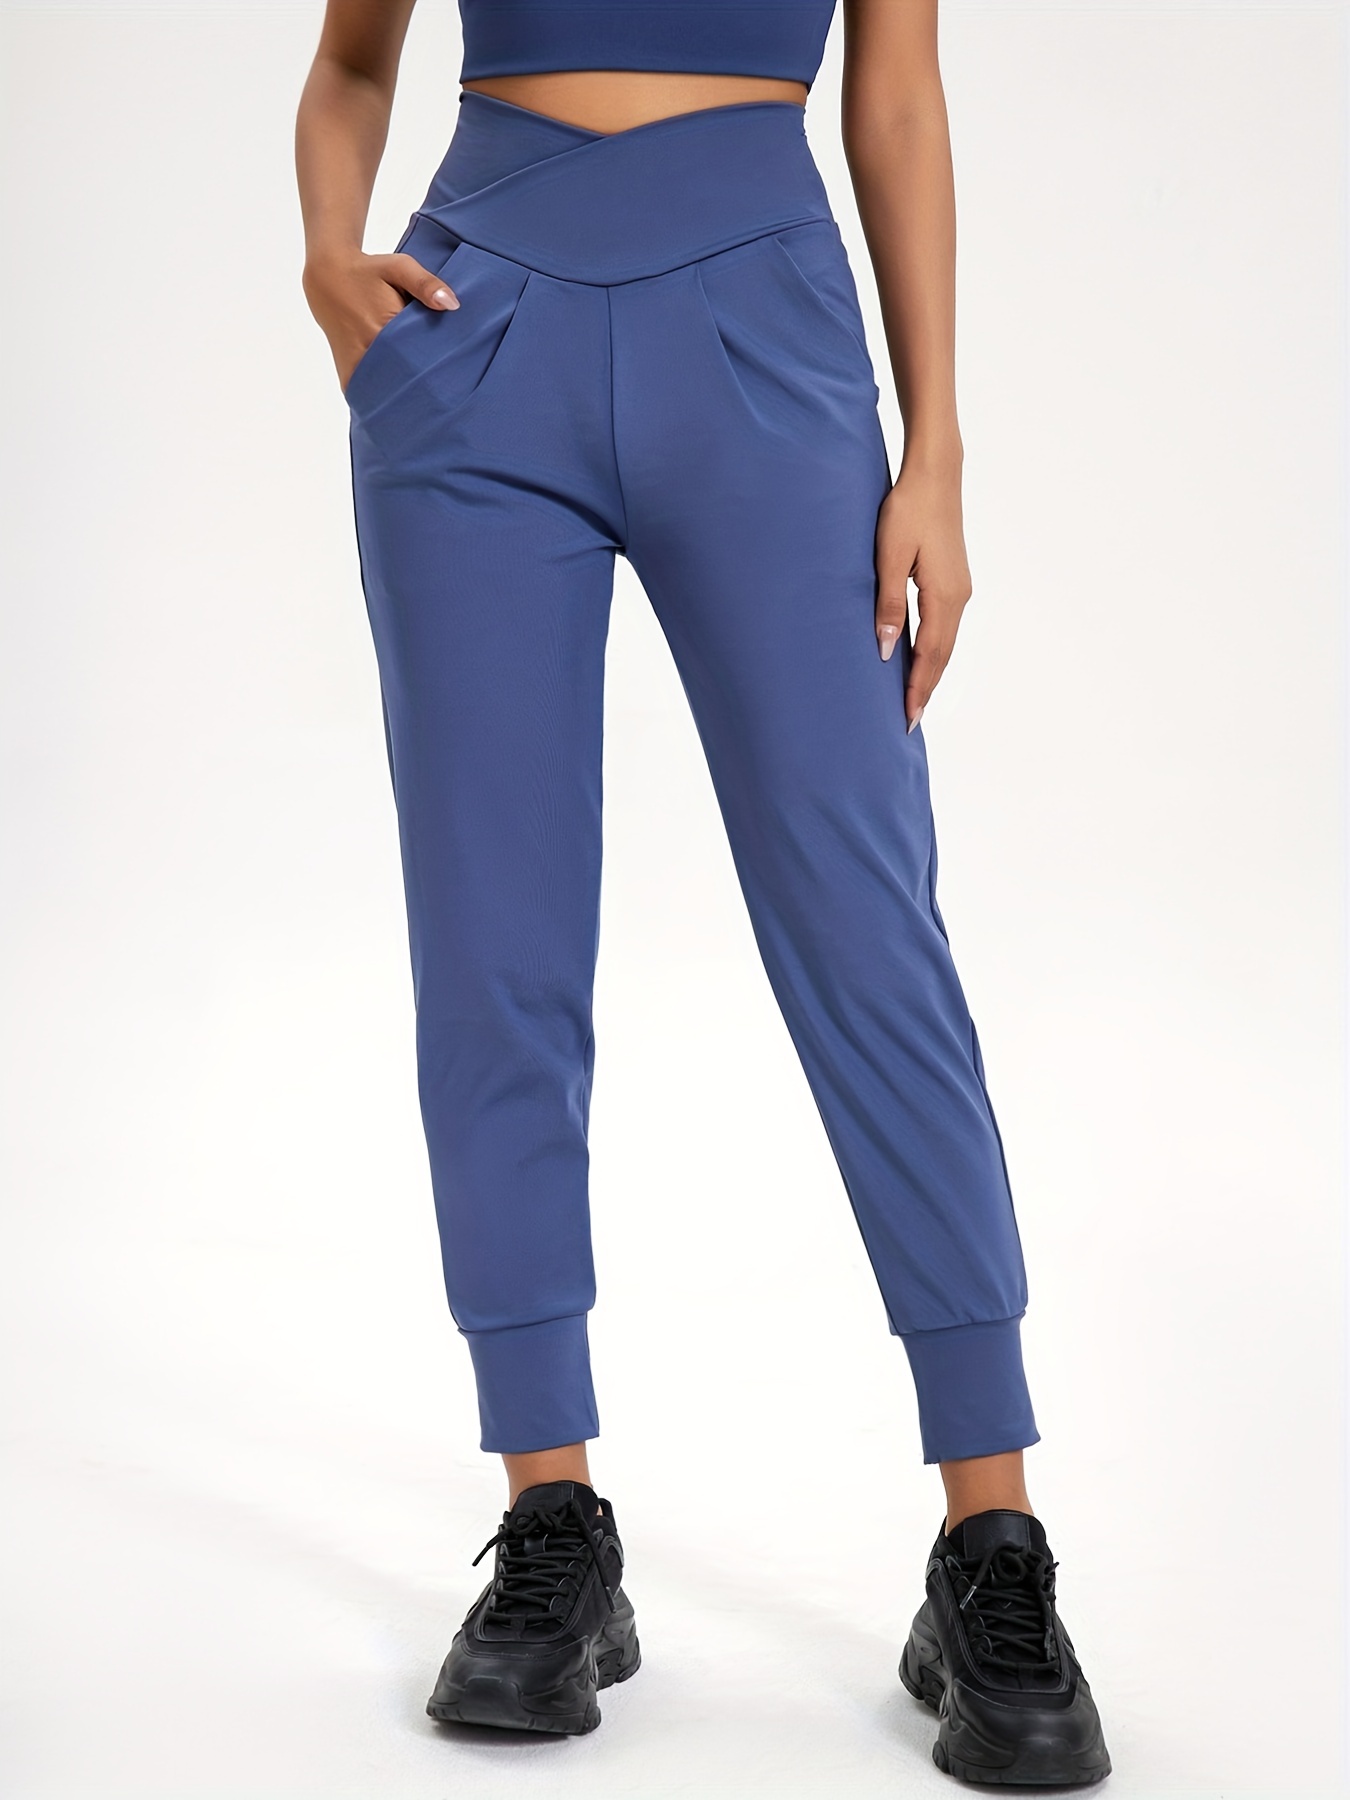 Soft and Comfortable Women's Pants